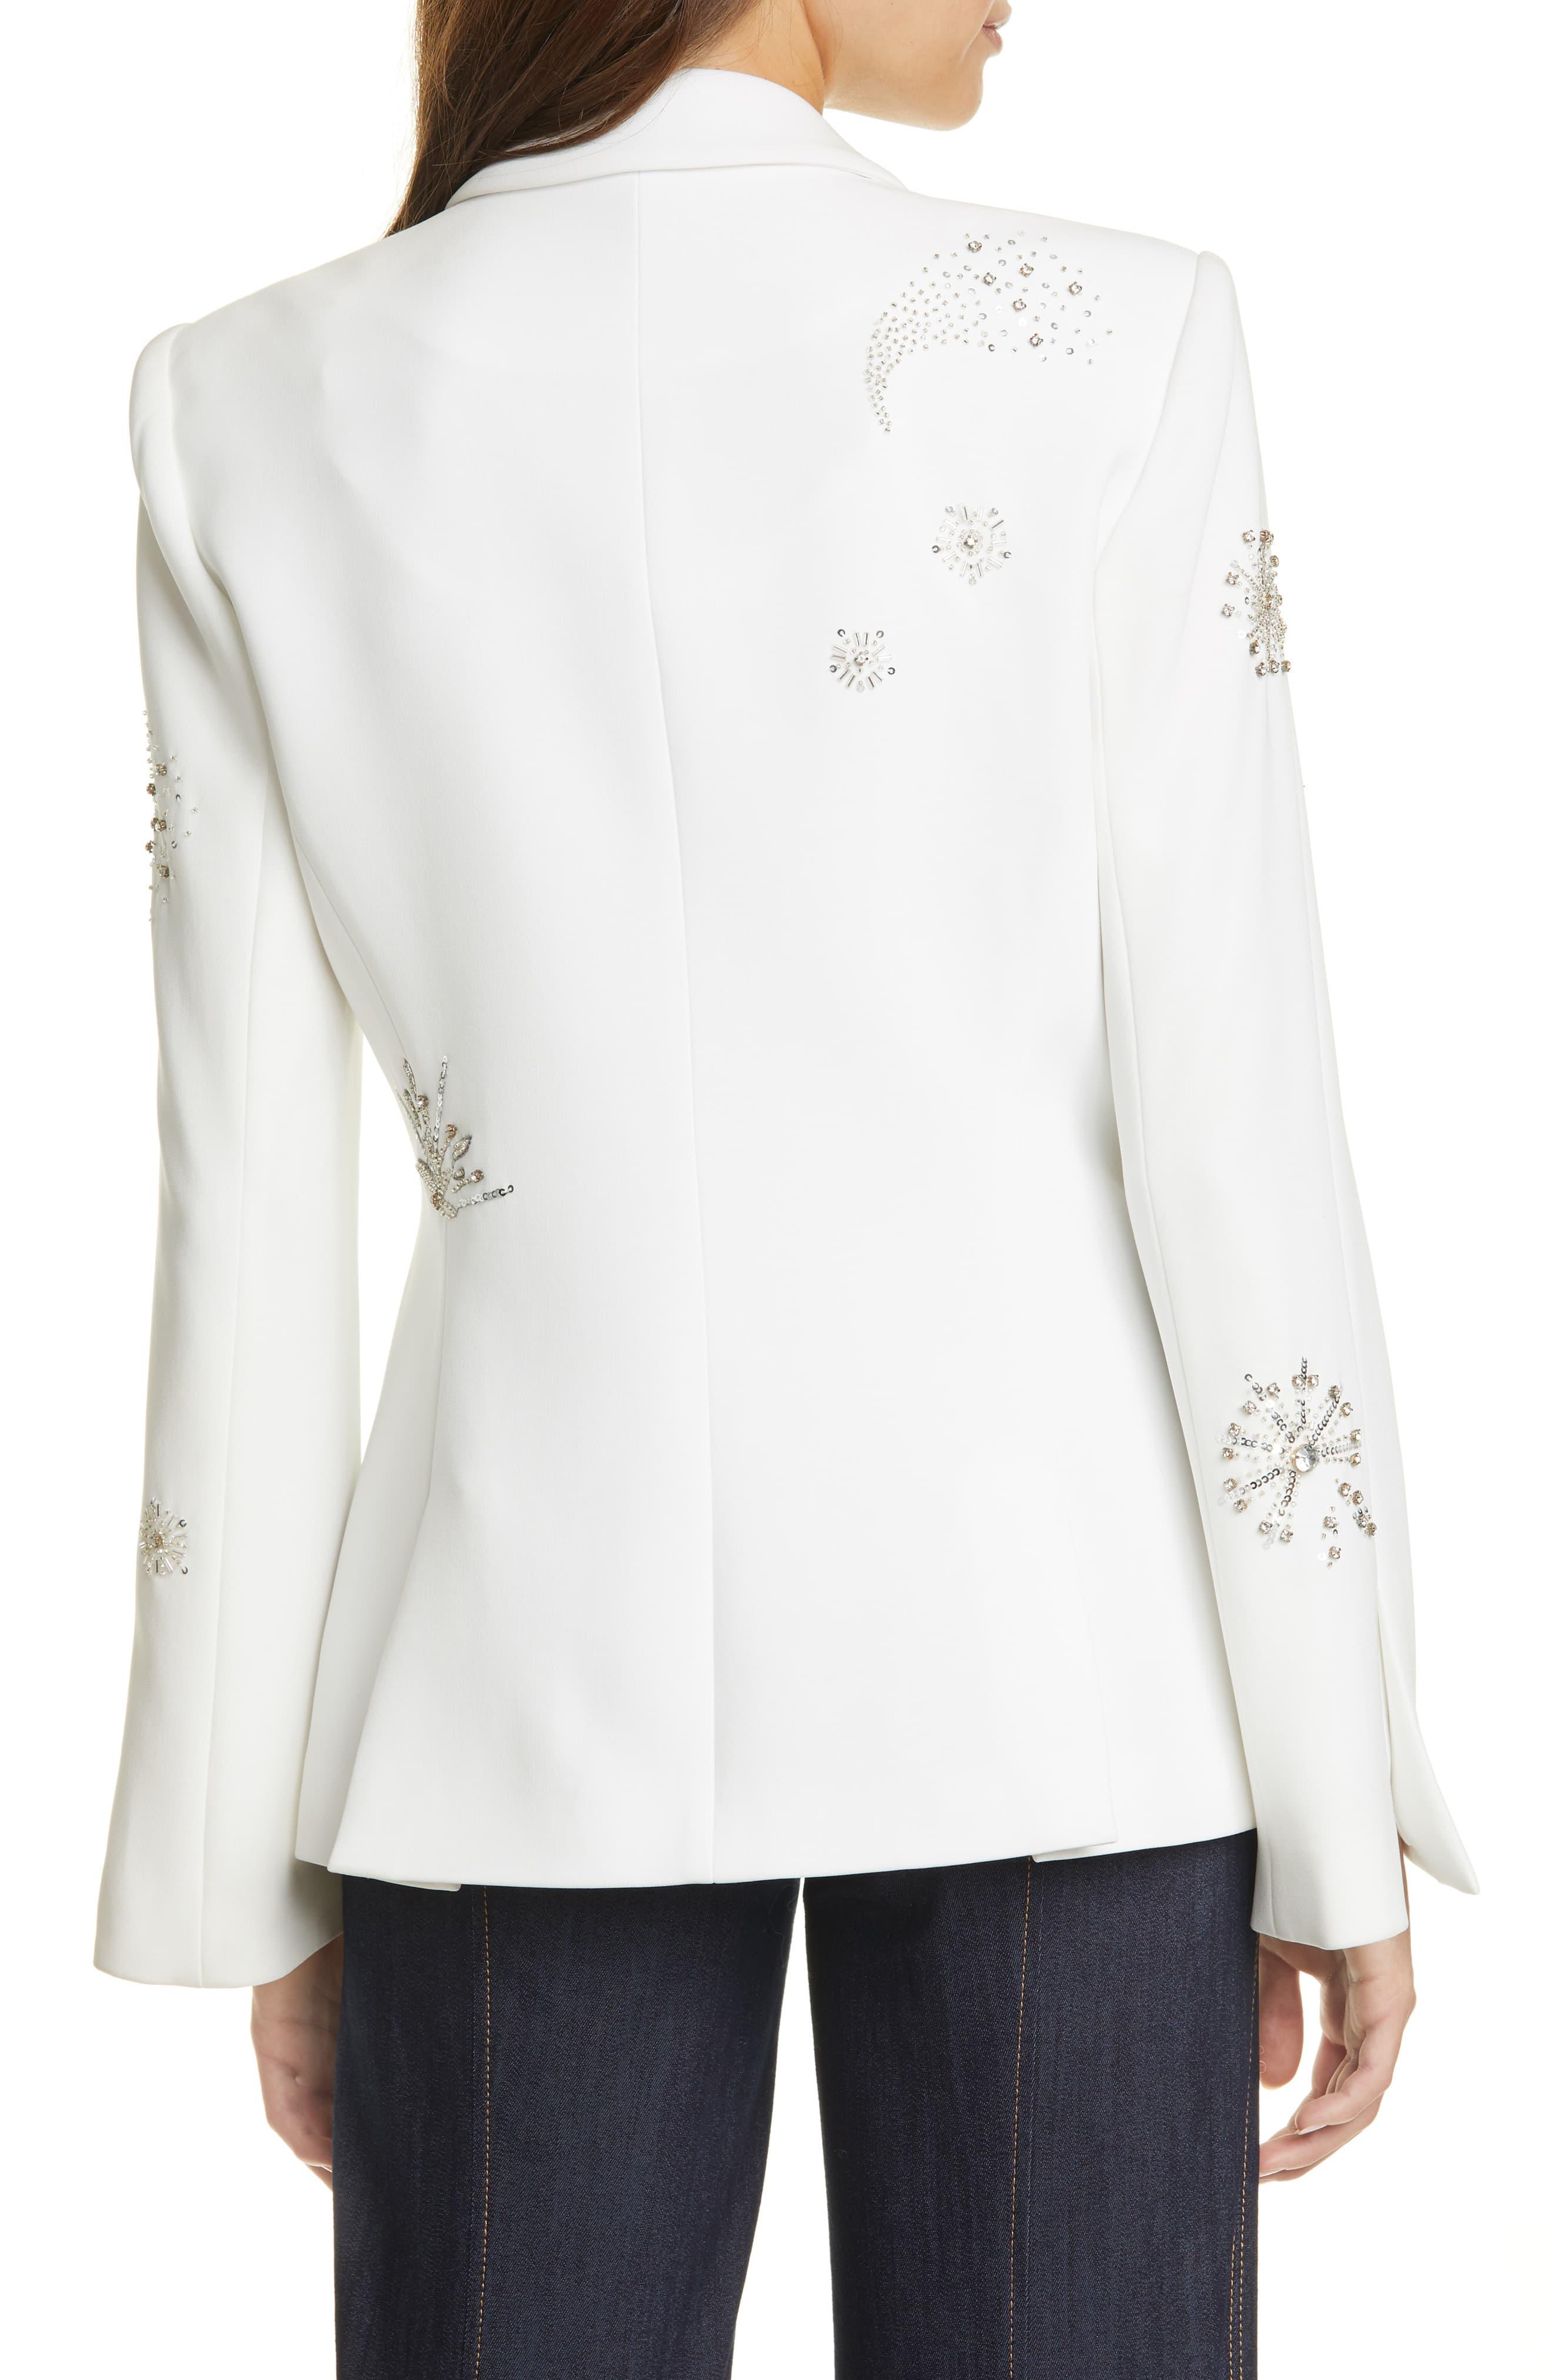 Cinq À Sept Synthetic Rumi Embellished Blazer in White - Lyst